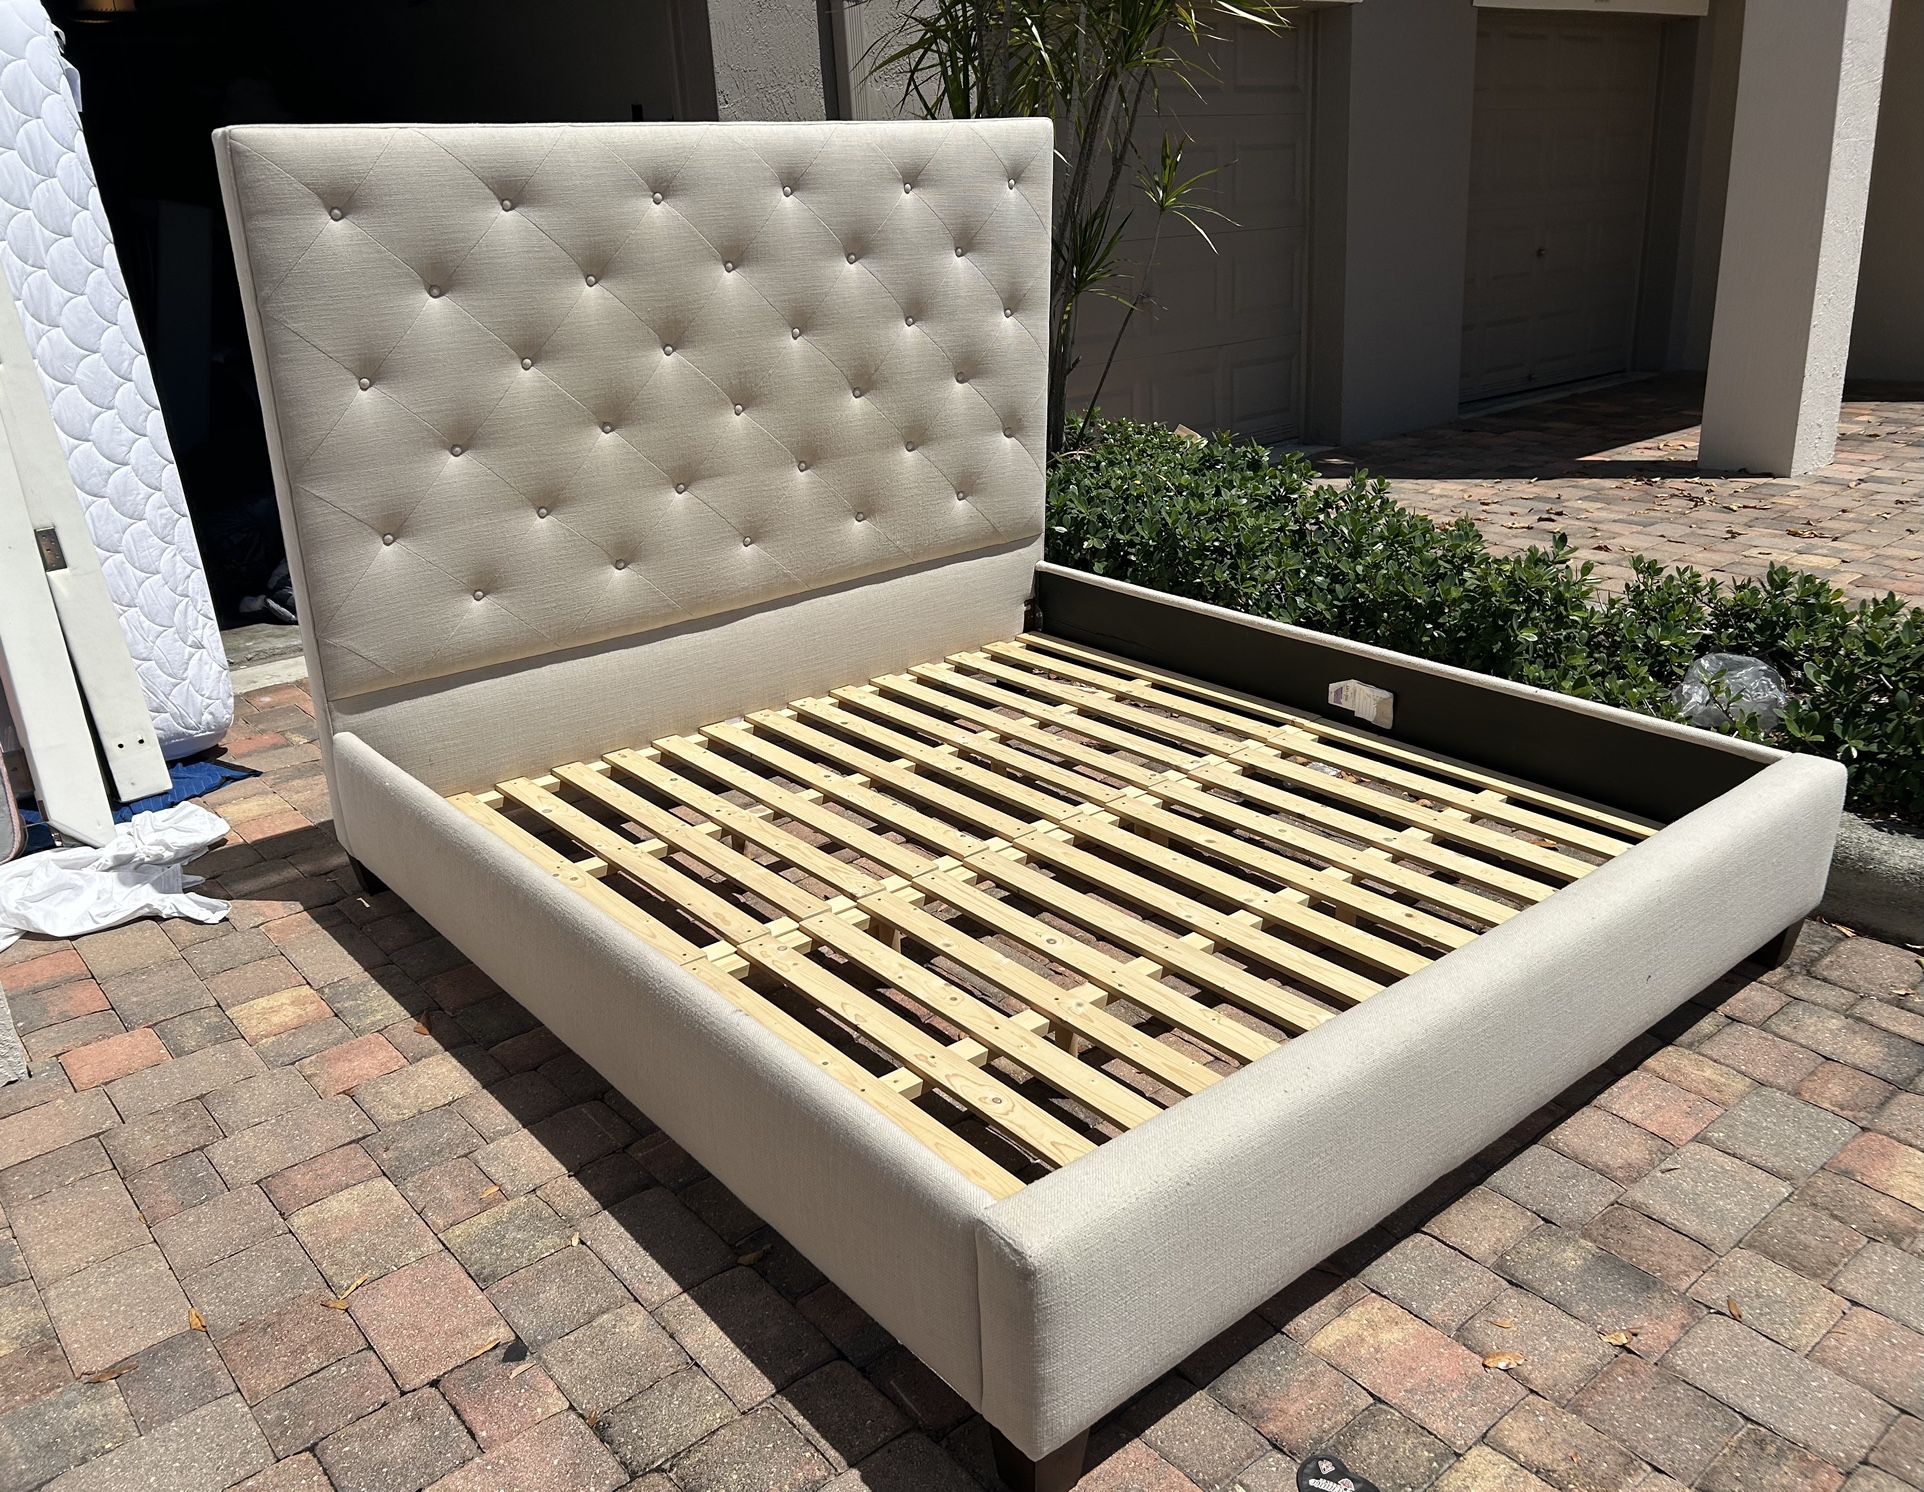 King Size Bed Frame With Mattress